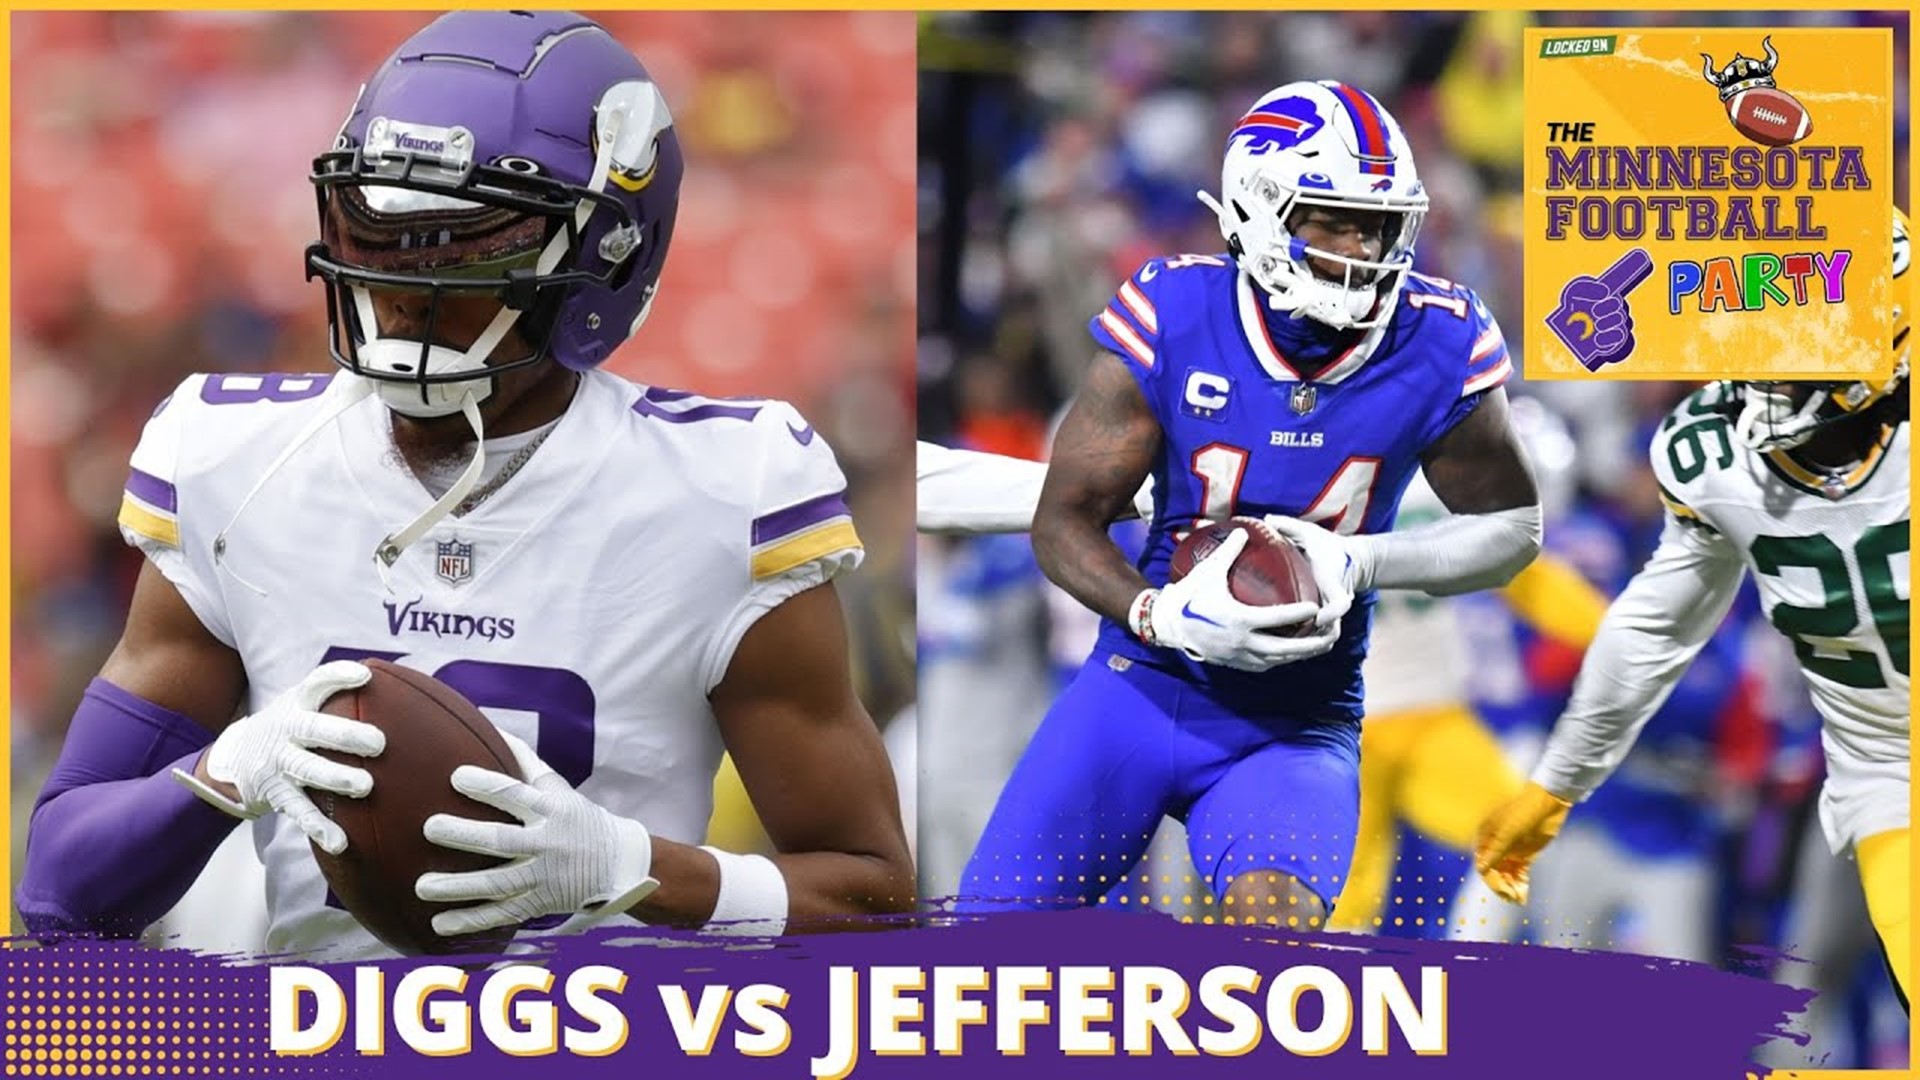 Would Anyone Exchange Justin Jefferson For Stefon Diggs? | The Minnesota Football Party